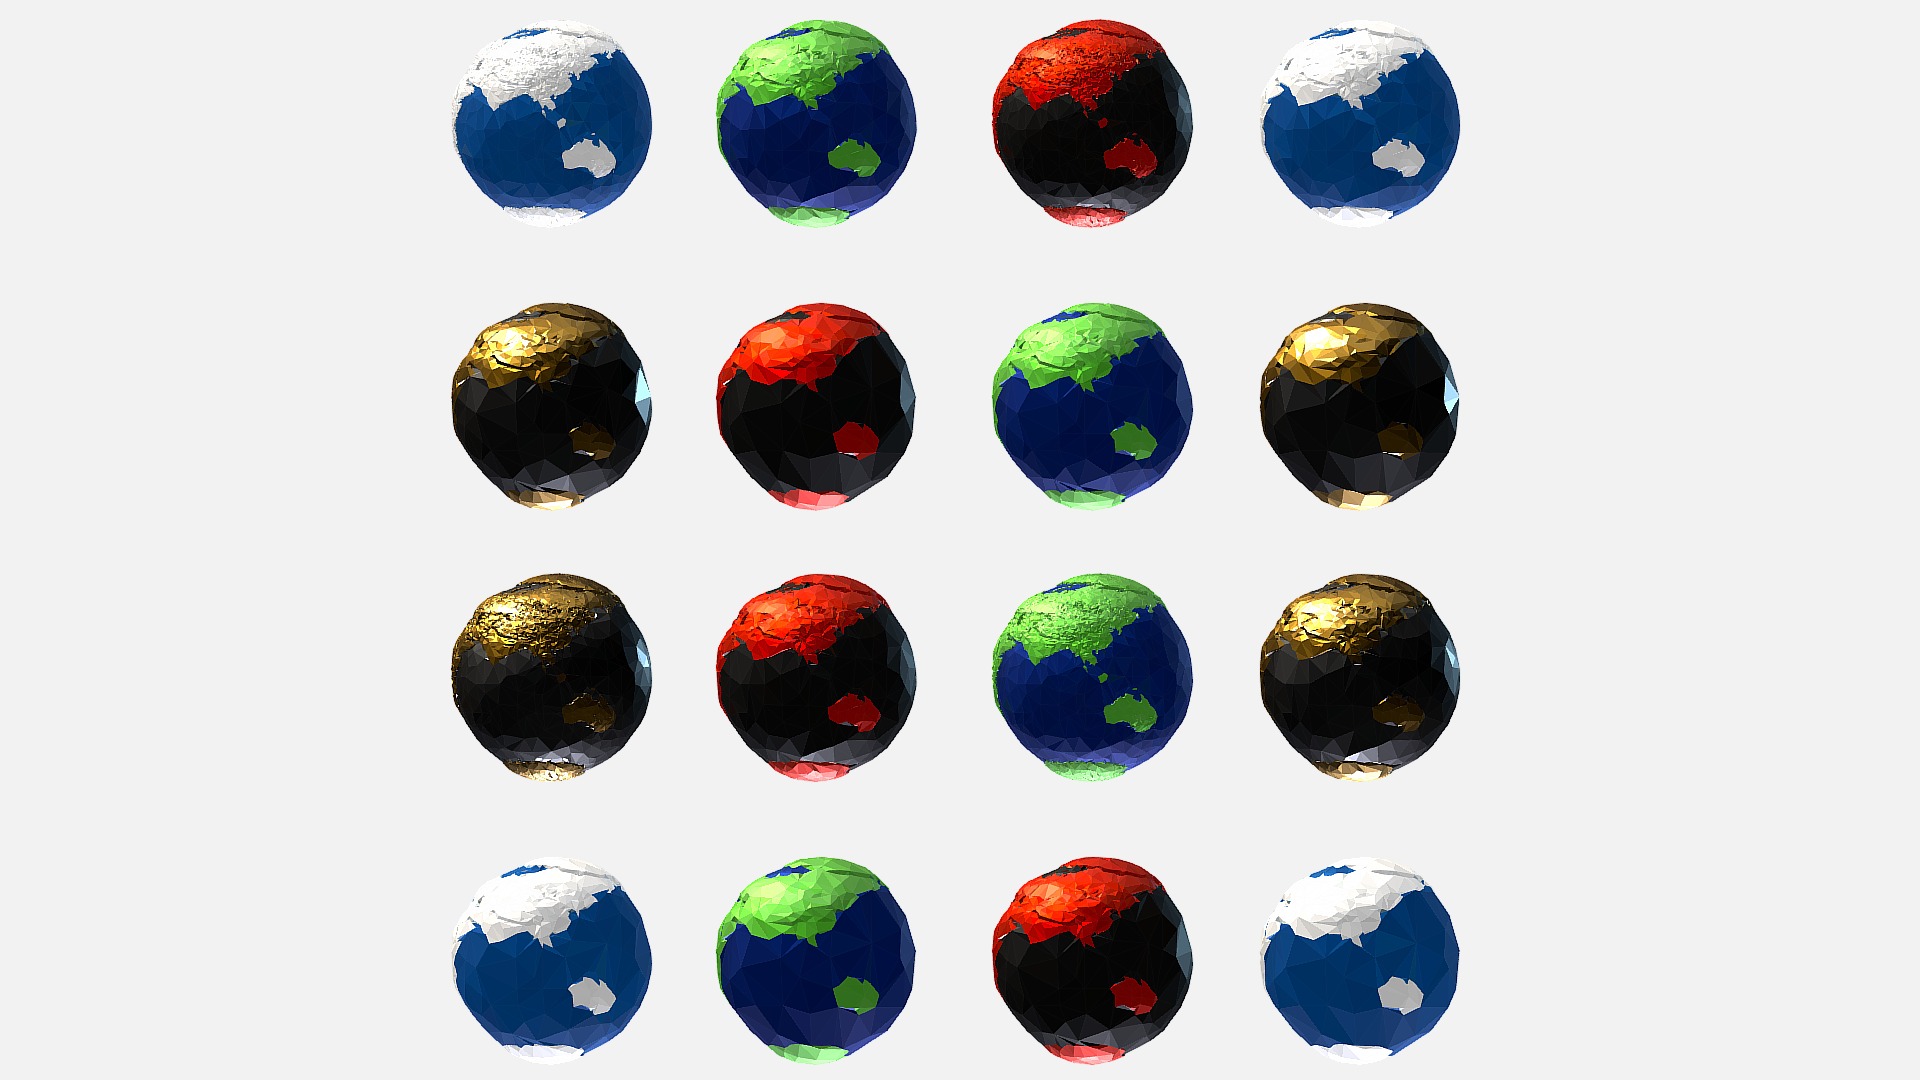 3D model 16 Animated Low Polygon Art Planets Earths - This is a 3D model of the 16 Animated Low Polygon Art Planets Earths. The 3D model is about background pattern.